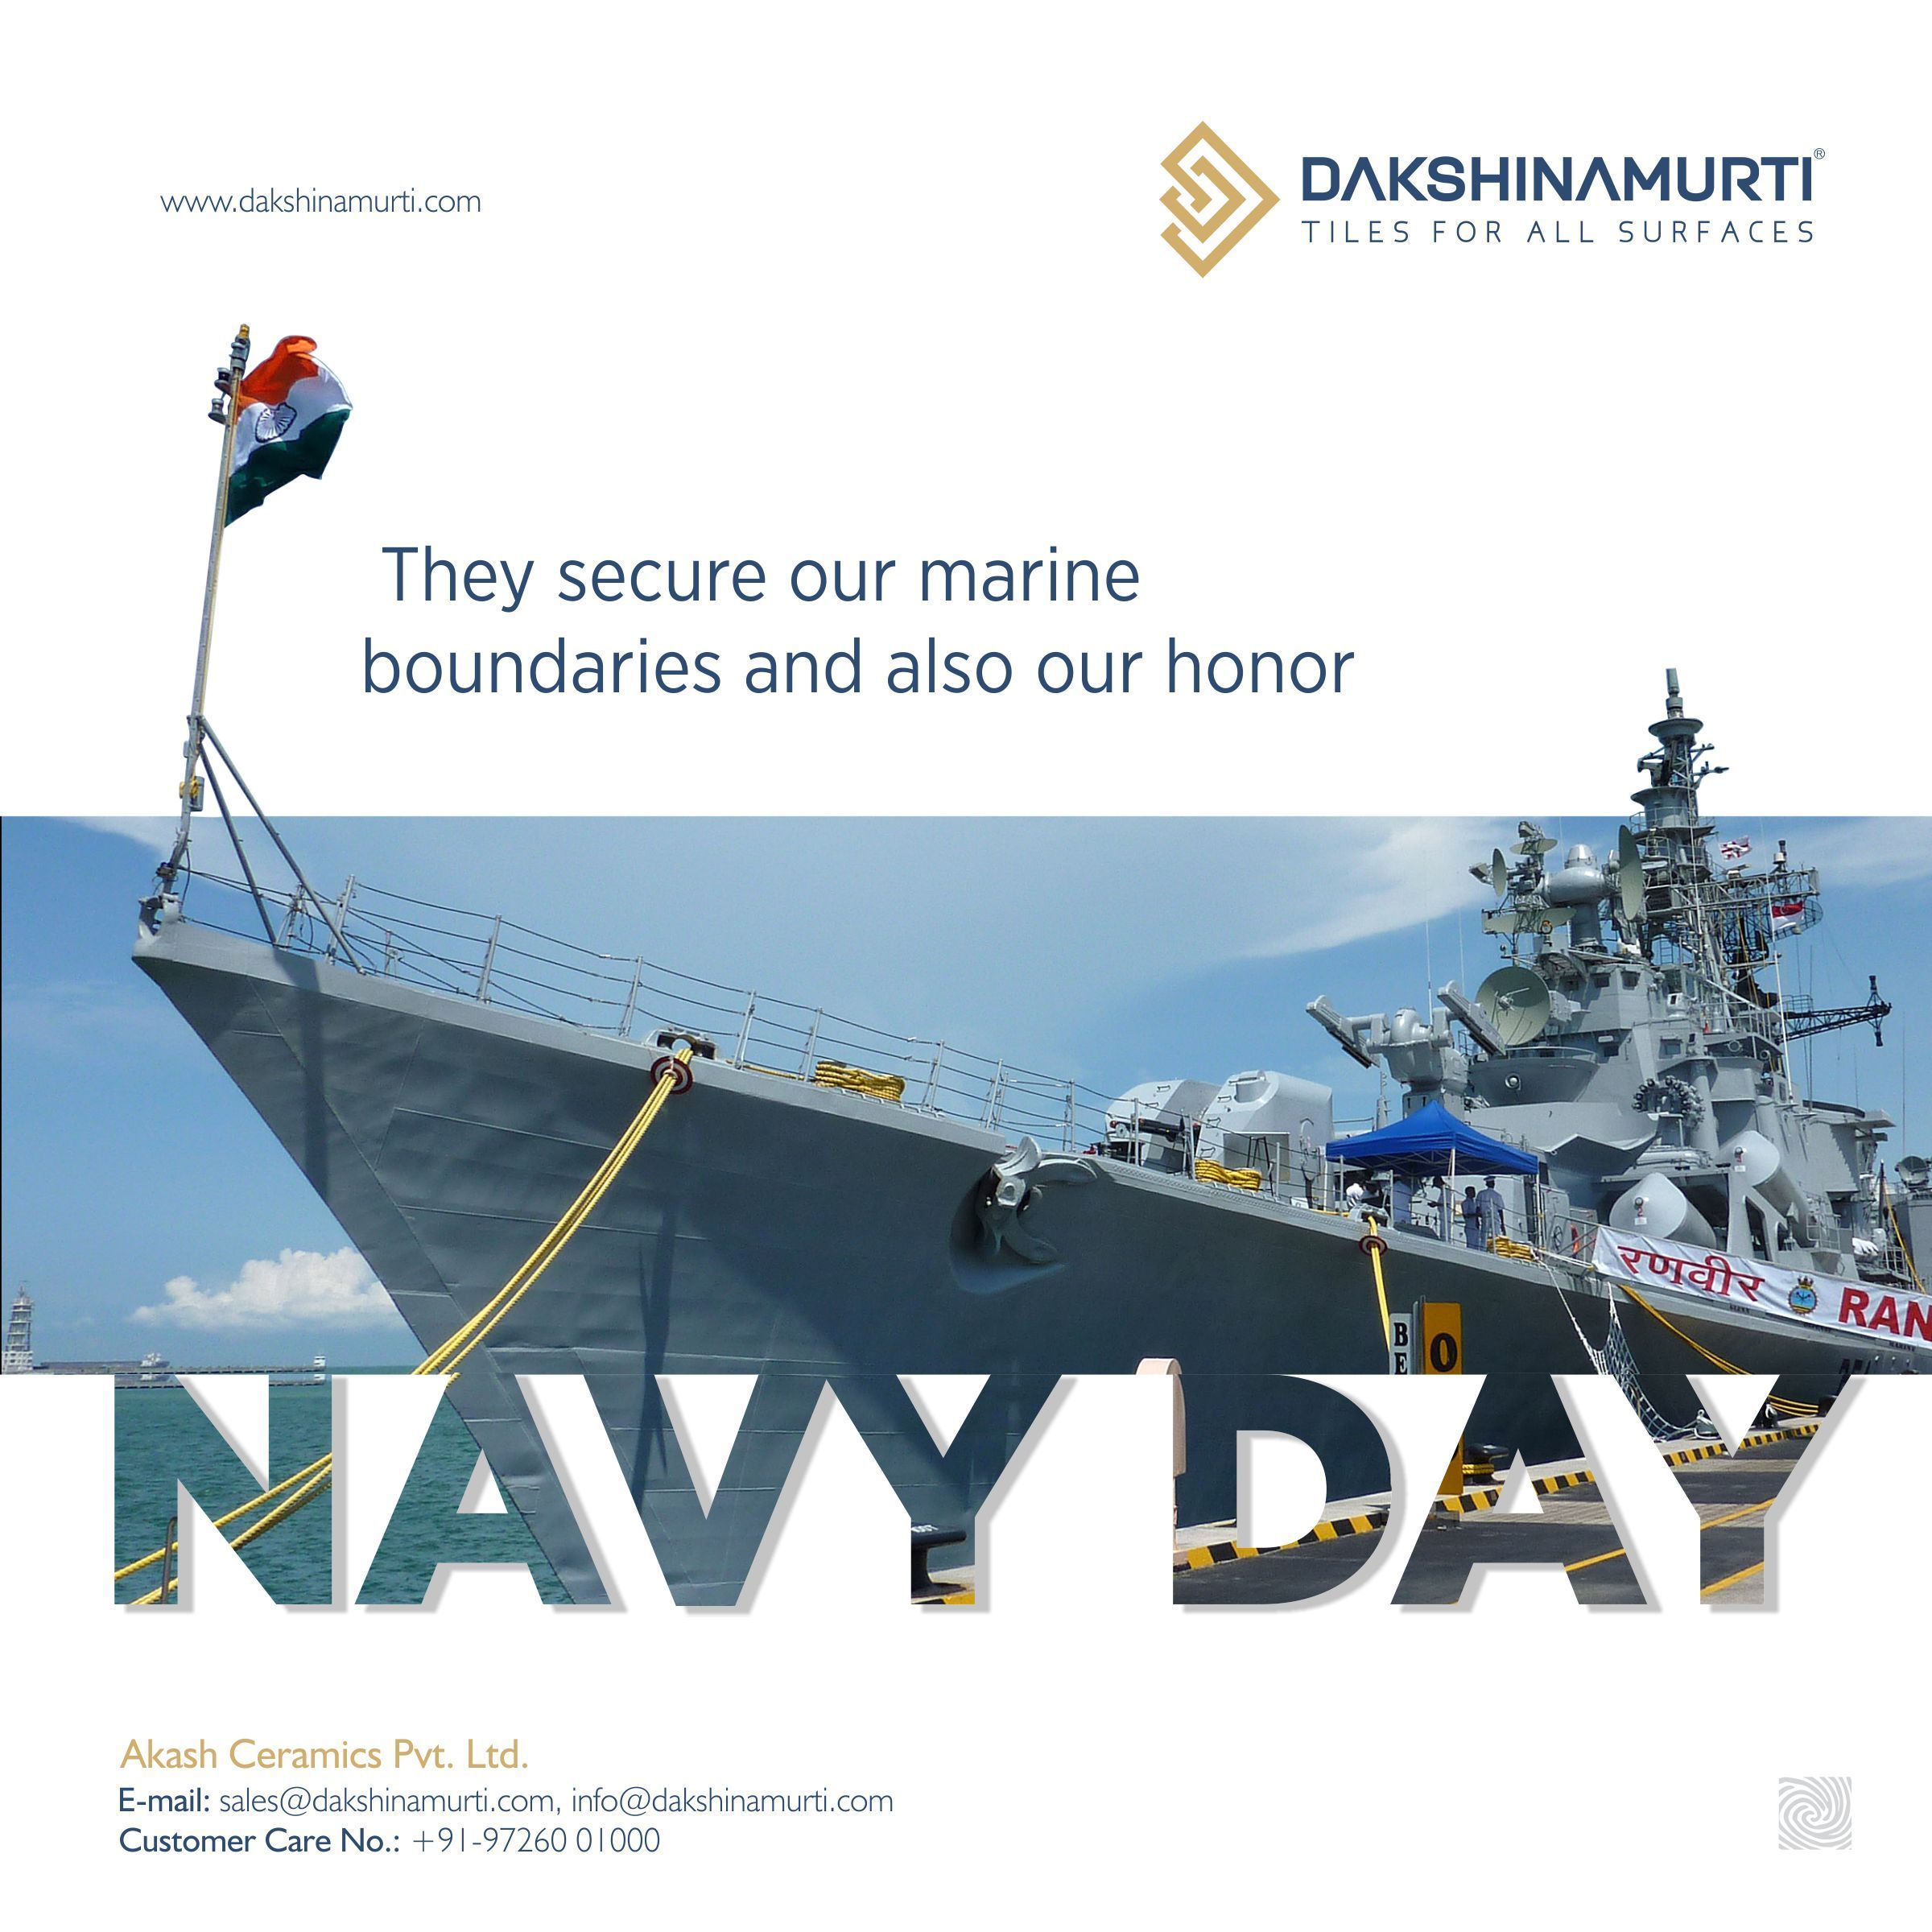 They secure our marine boundaries and also our honor Indian Navy Day! #DakshinamurtiTiles #FloorTiles #Indian #Navy #Day. Navy day, Indian navy day, Indian navy